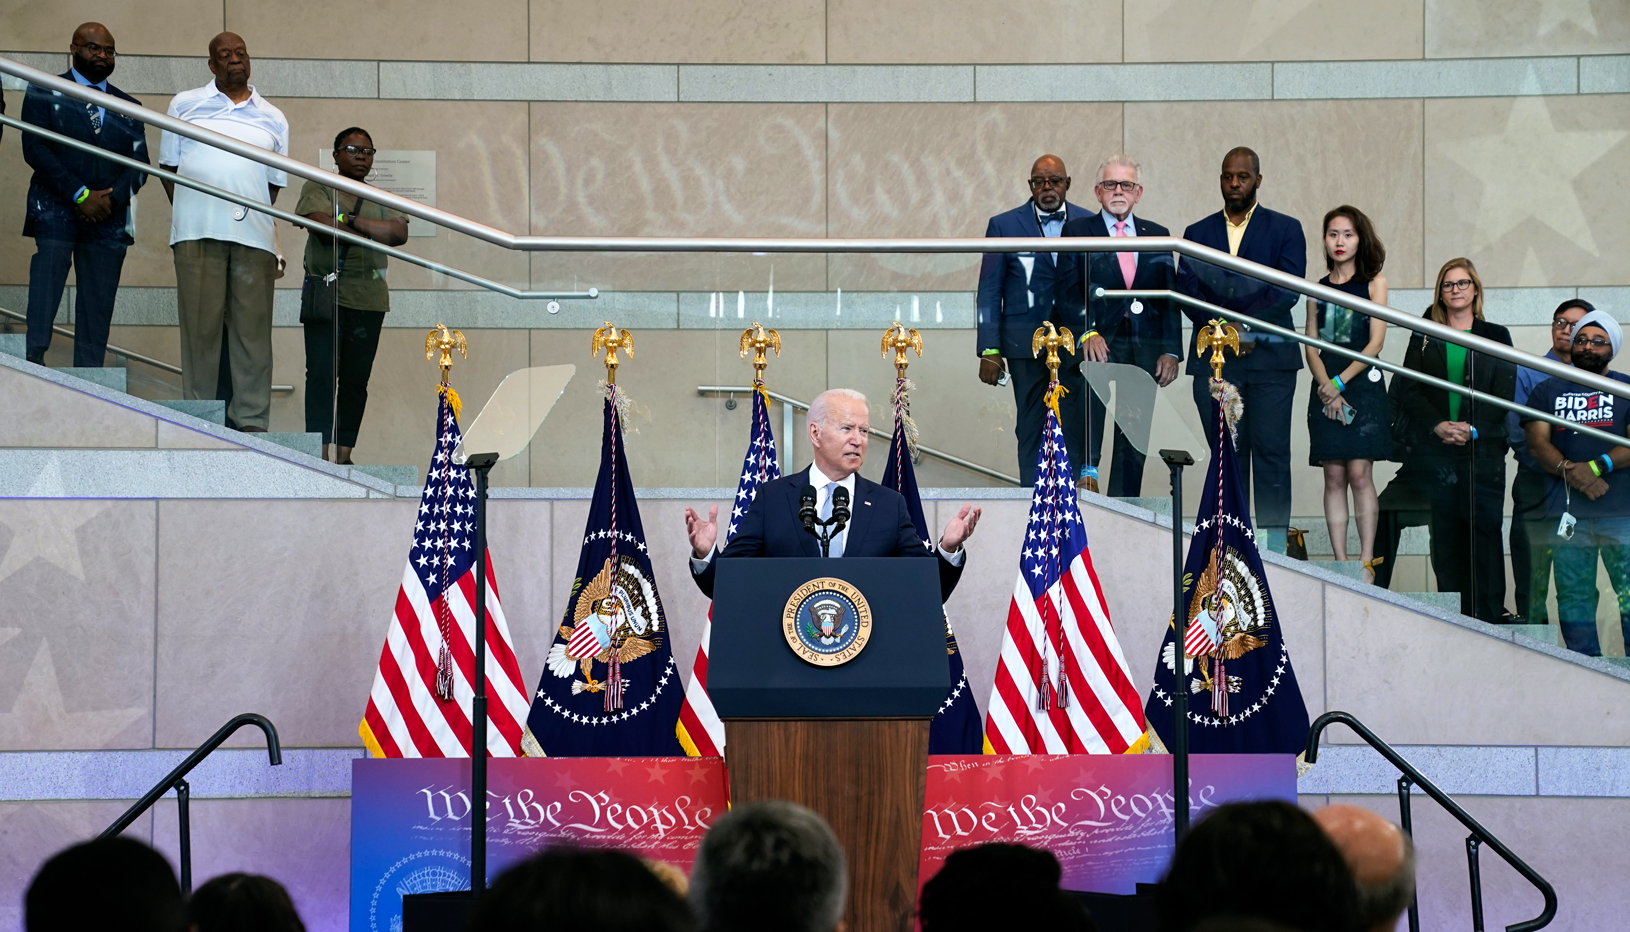 President Joe Biden speaks from a podium, surrounded by American flags and onlookers